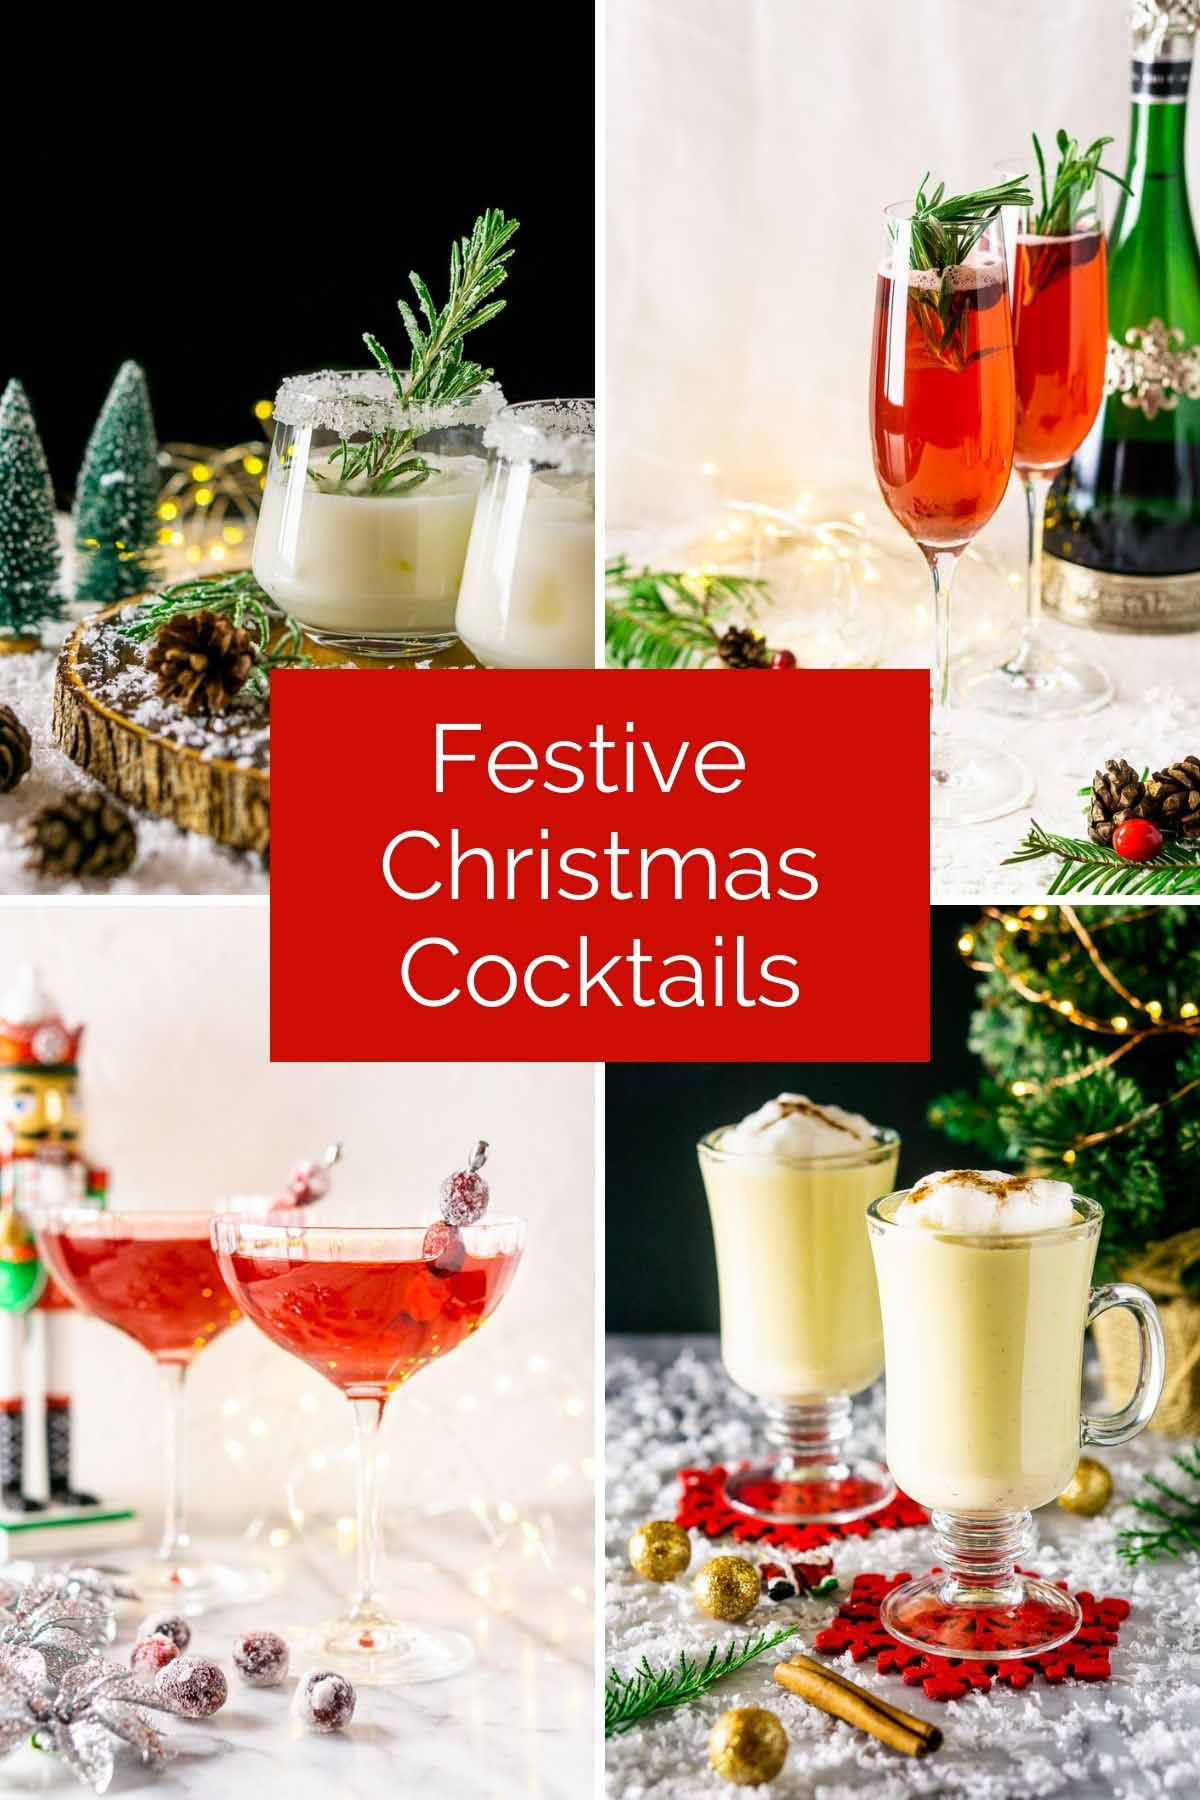 A collage showing four festive Christmas cocktails with text overlay.